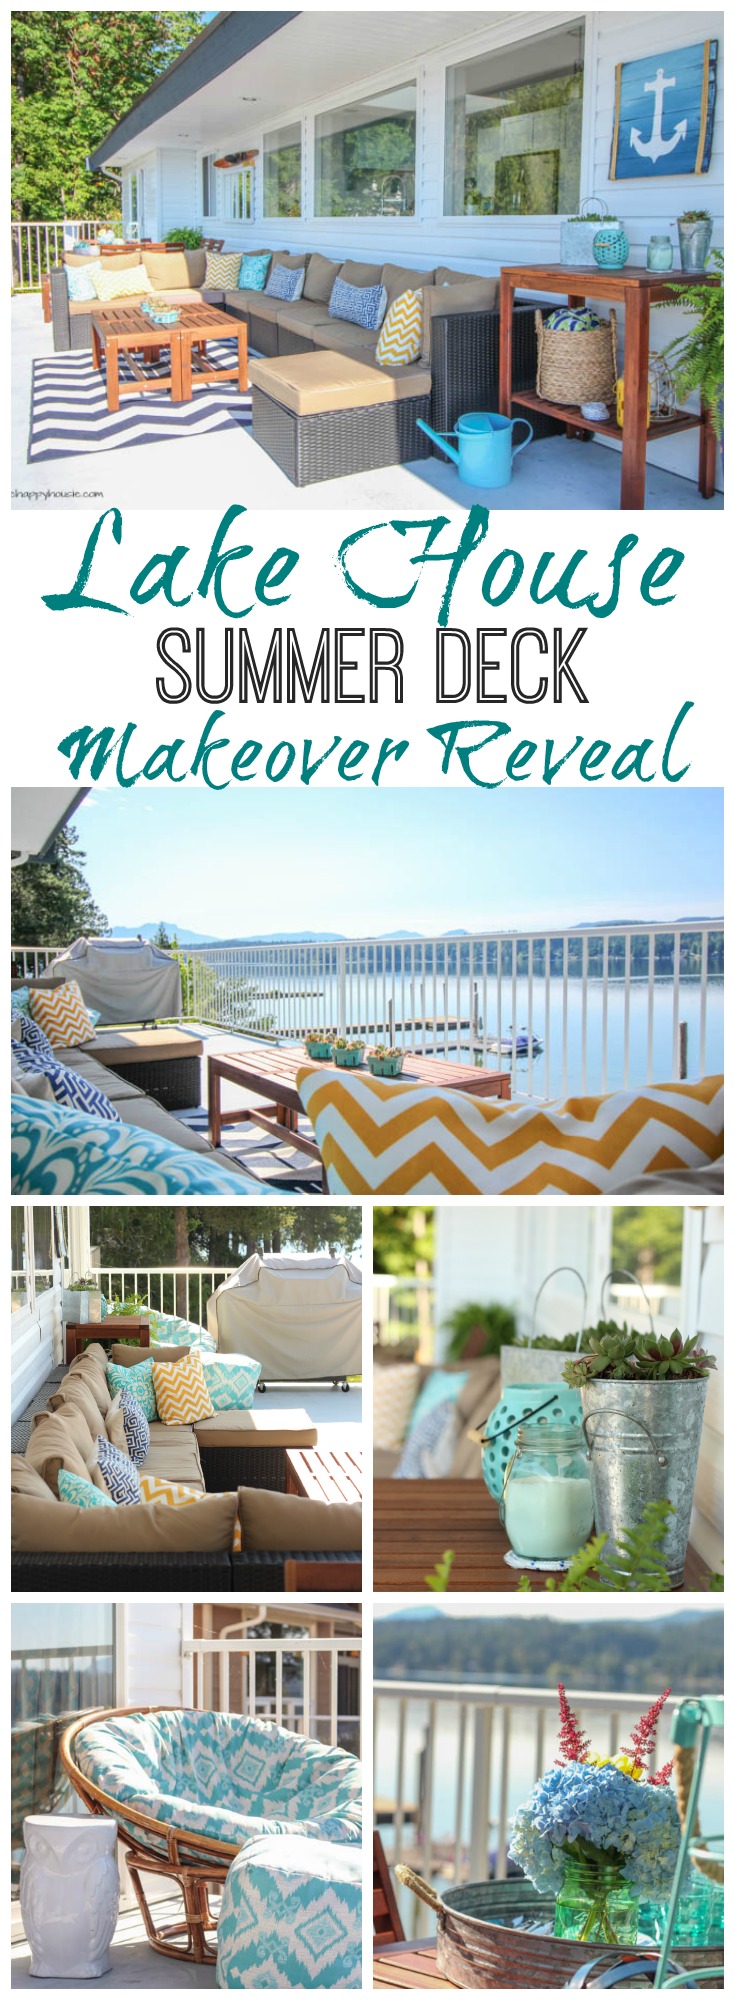 Our Summer Deck Makeover Reveal - The Happy Housie